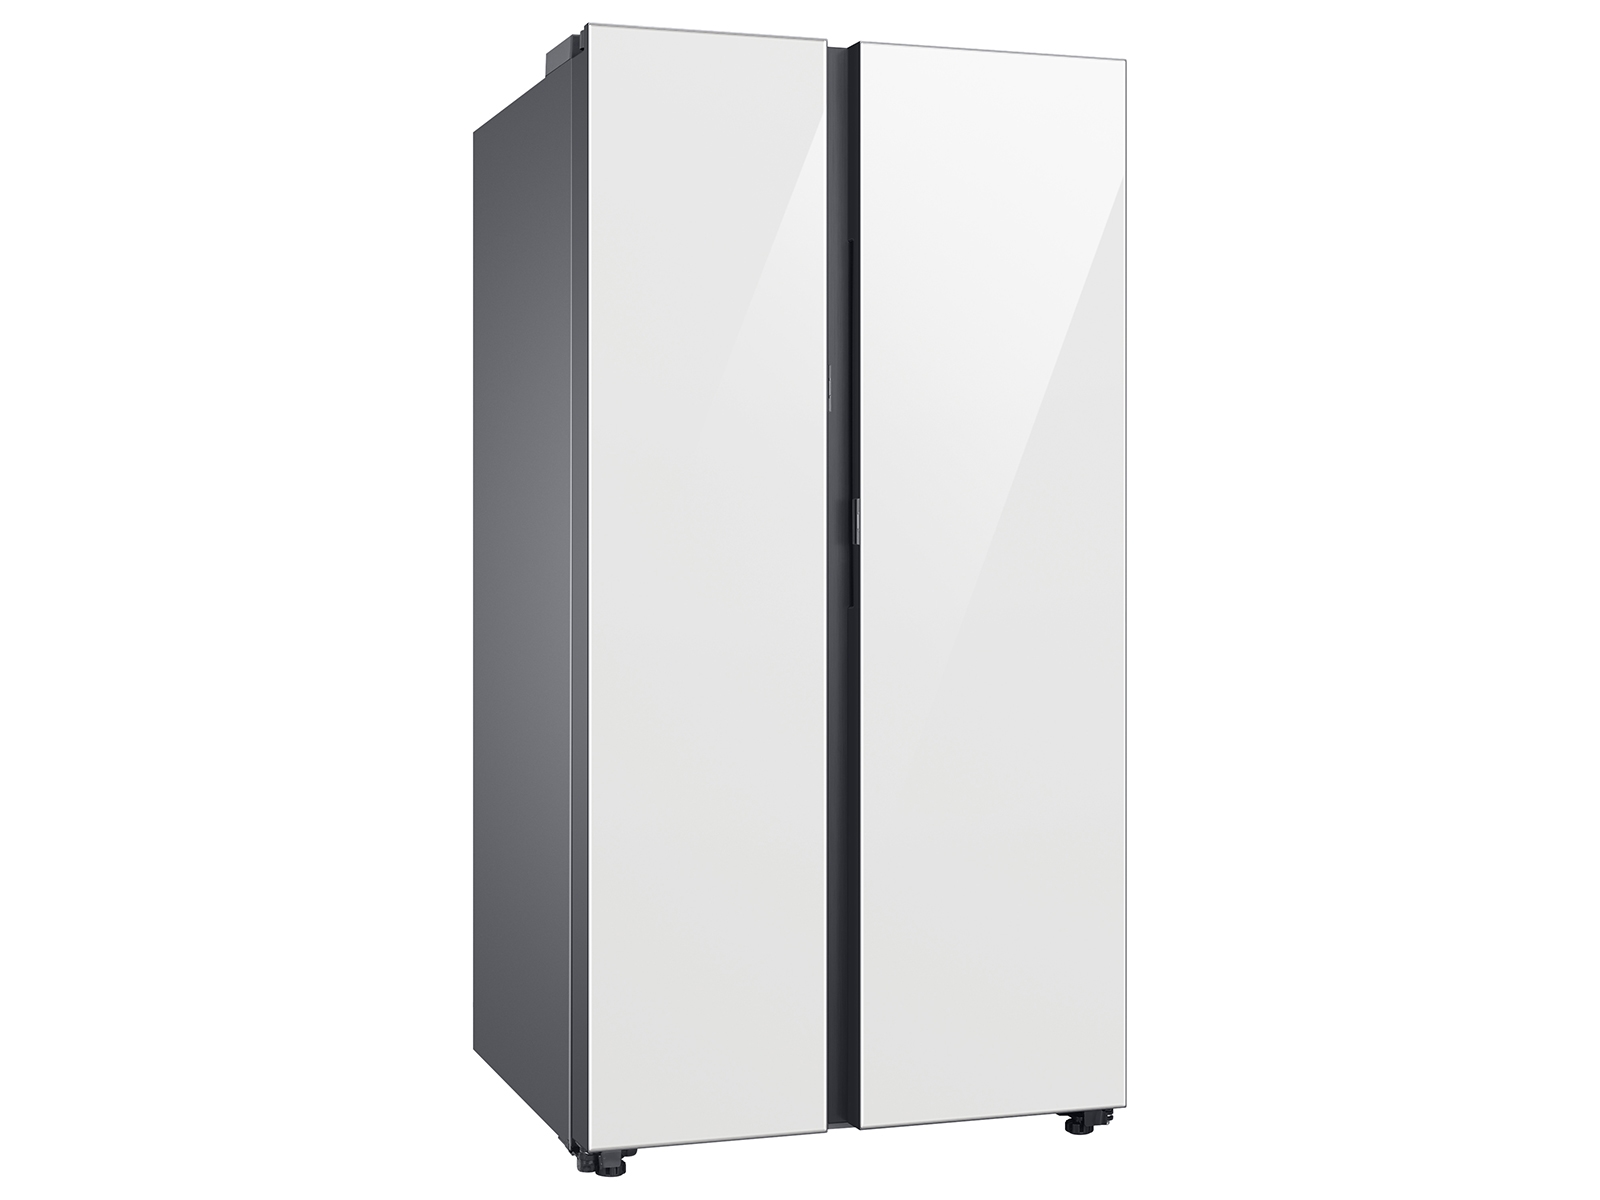 Bespoke 28 cu. ft. Side-by-side Beverage US | Center Glass White in Refrigerator Samsung with